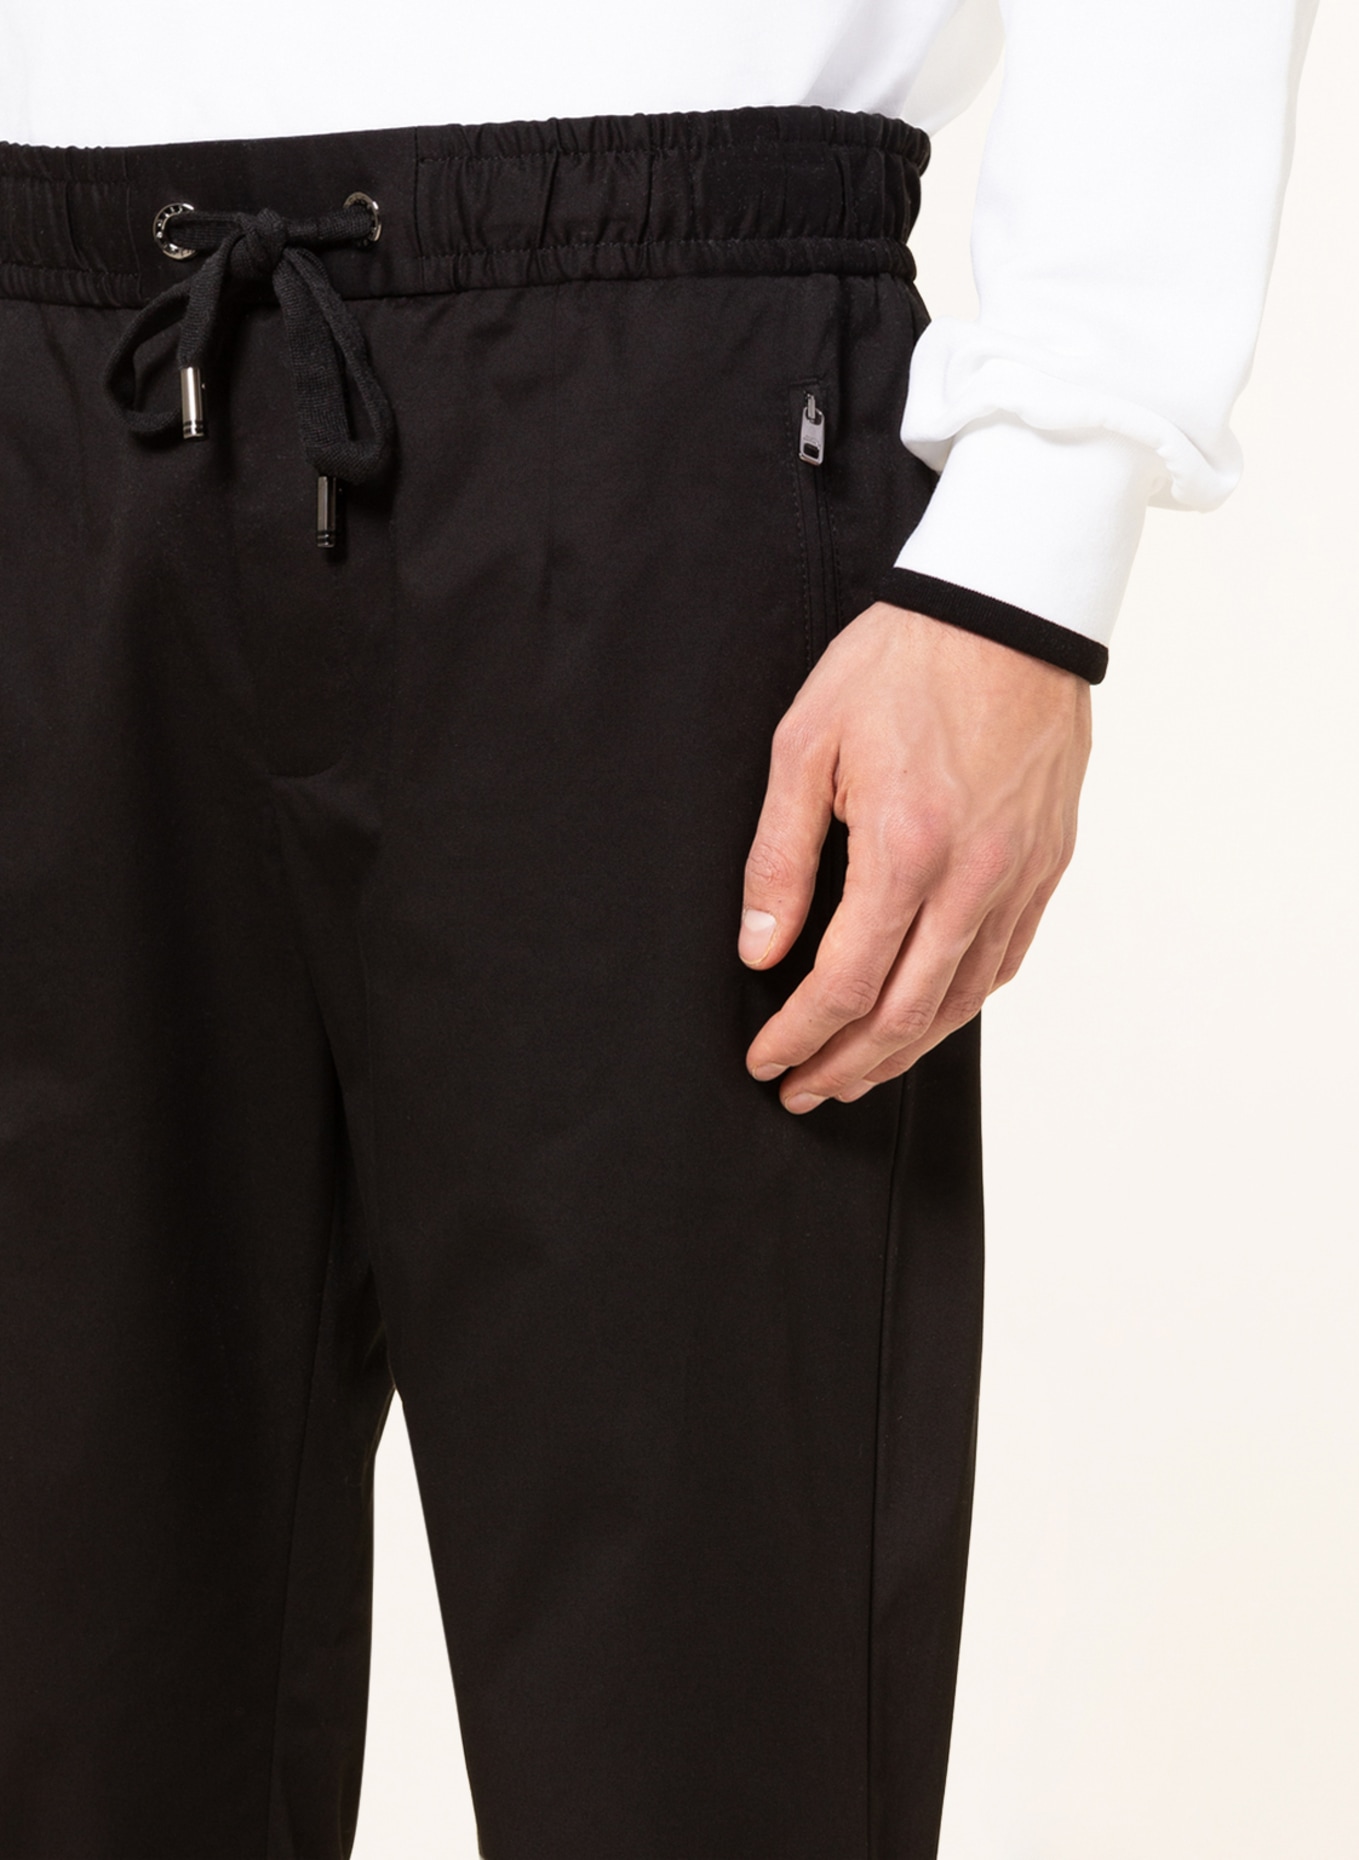 DOLCE & GABBANA Pants in jogger style extra slim fit , Color: BLACK (Image 5)